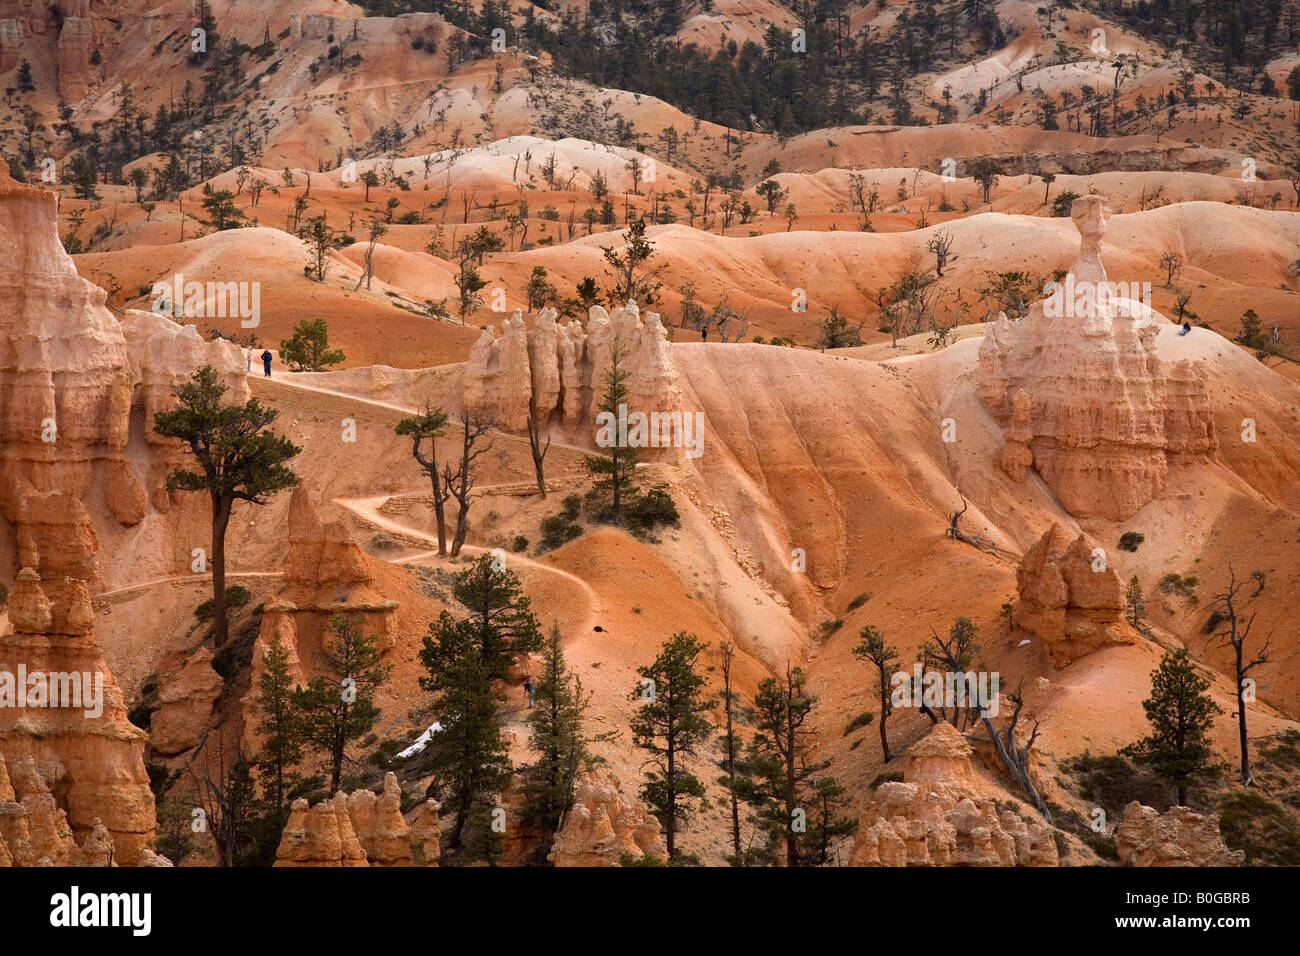 Hiking Trails in Bryce Canyon National Park, Utah Stock Photo